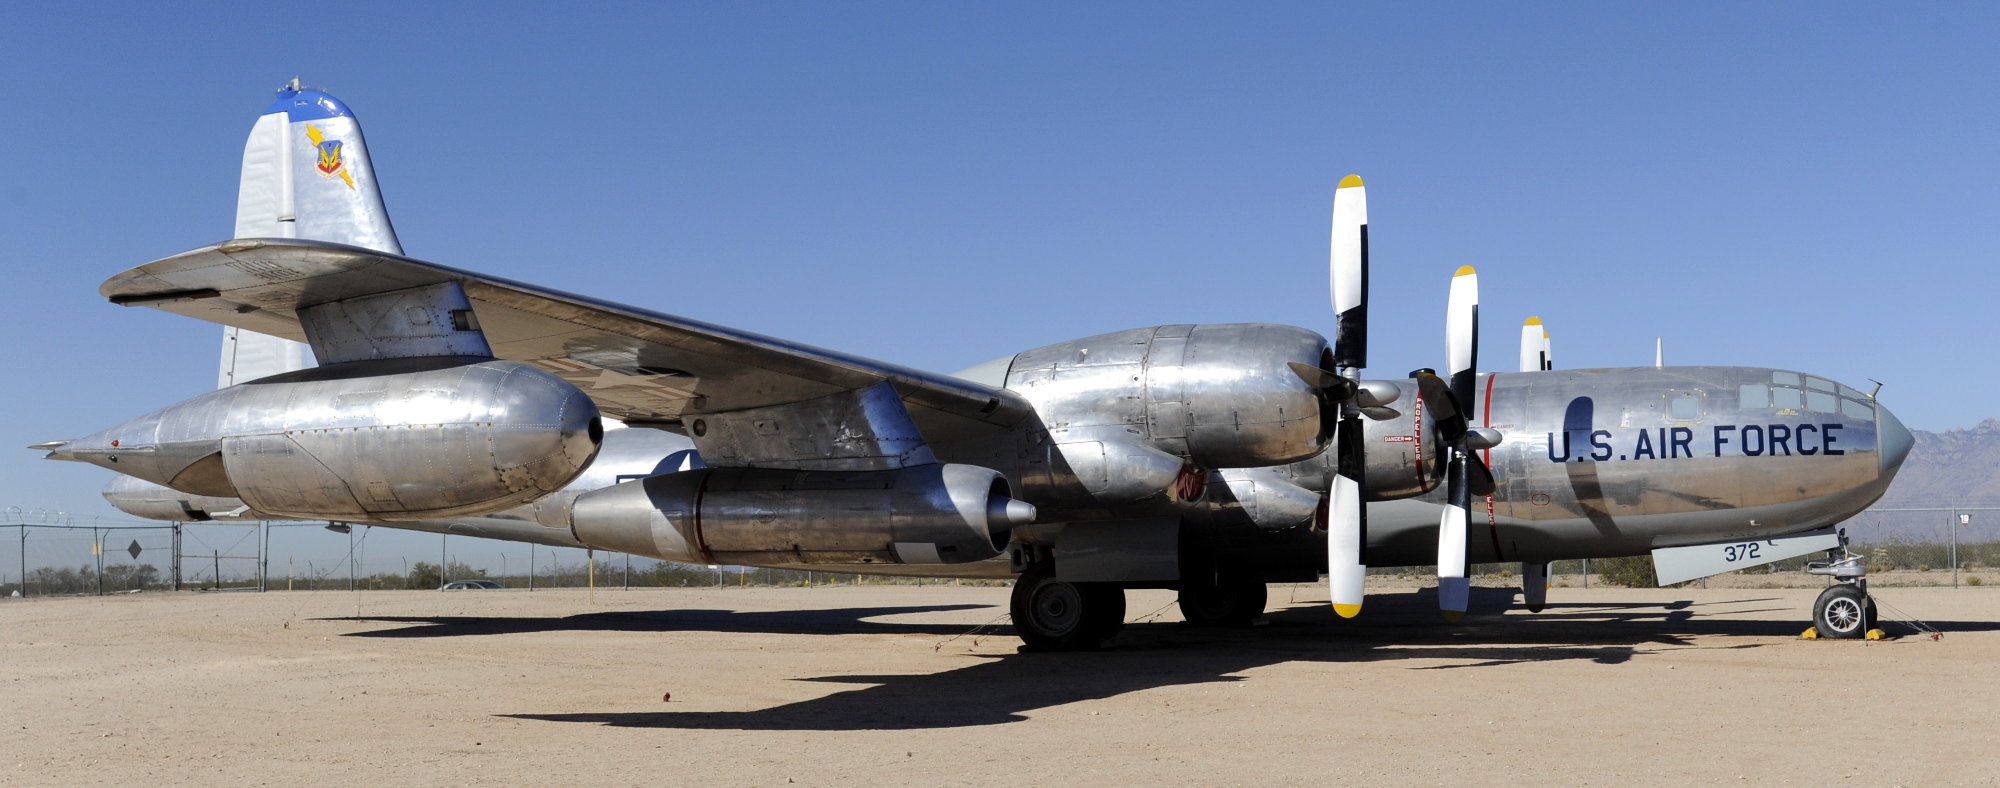 KB50 bomber at Pima Air and Space Museum, Tucson, Airzona